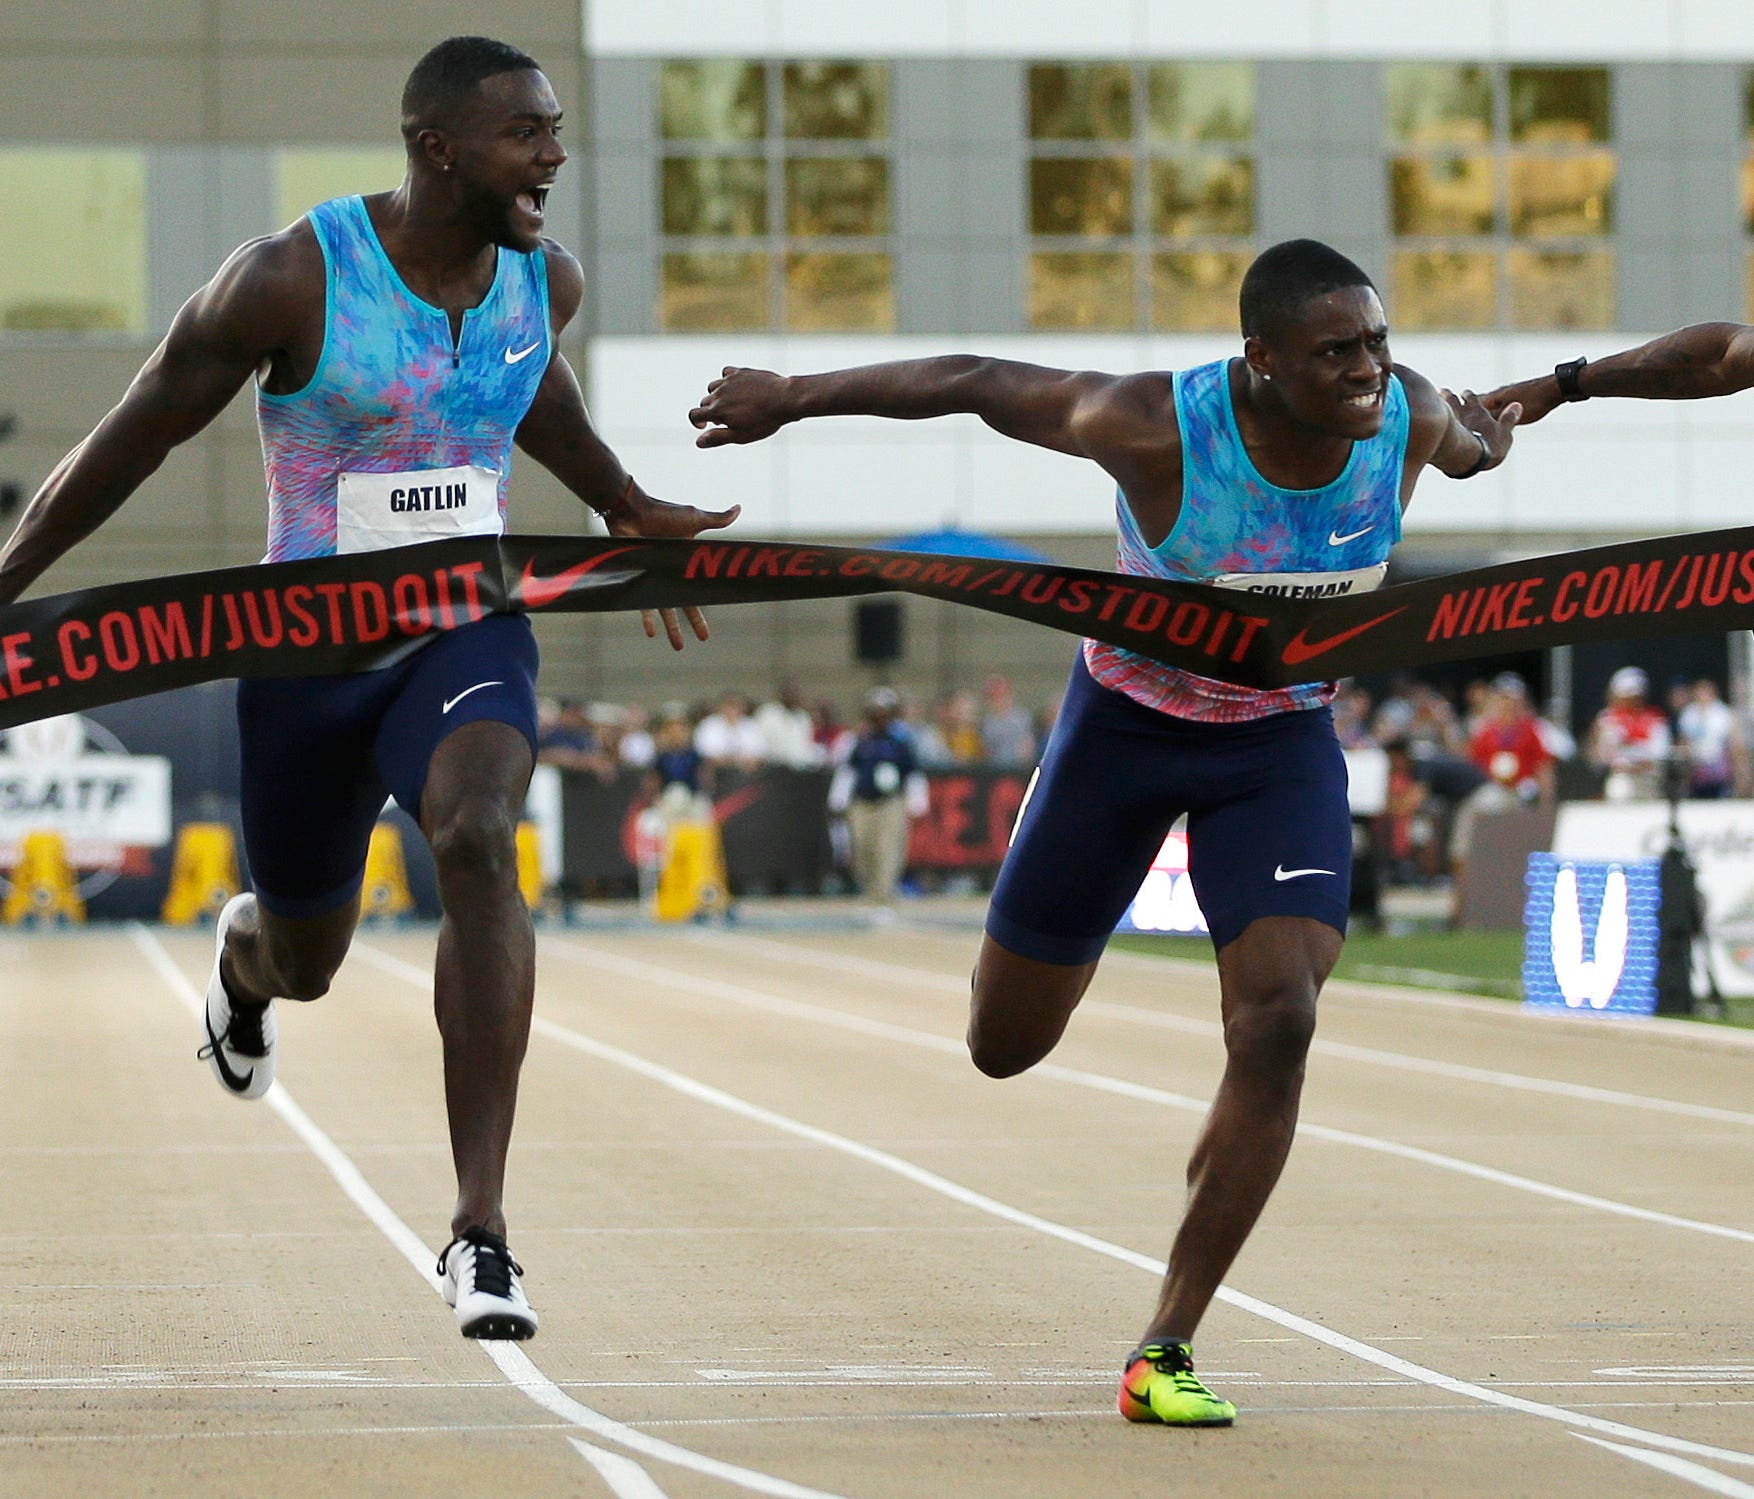 Justin Gatlin, left, edges Christian Coleman in the 100 final at the U.S. championships in Sacramento on Friday.